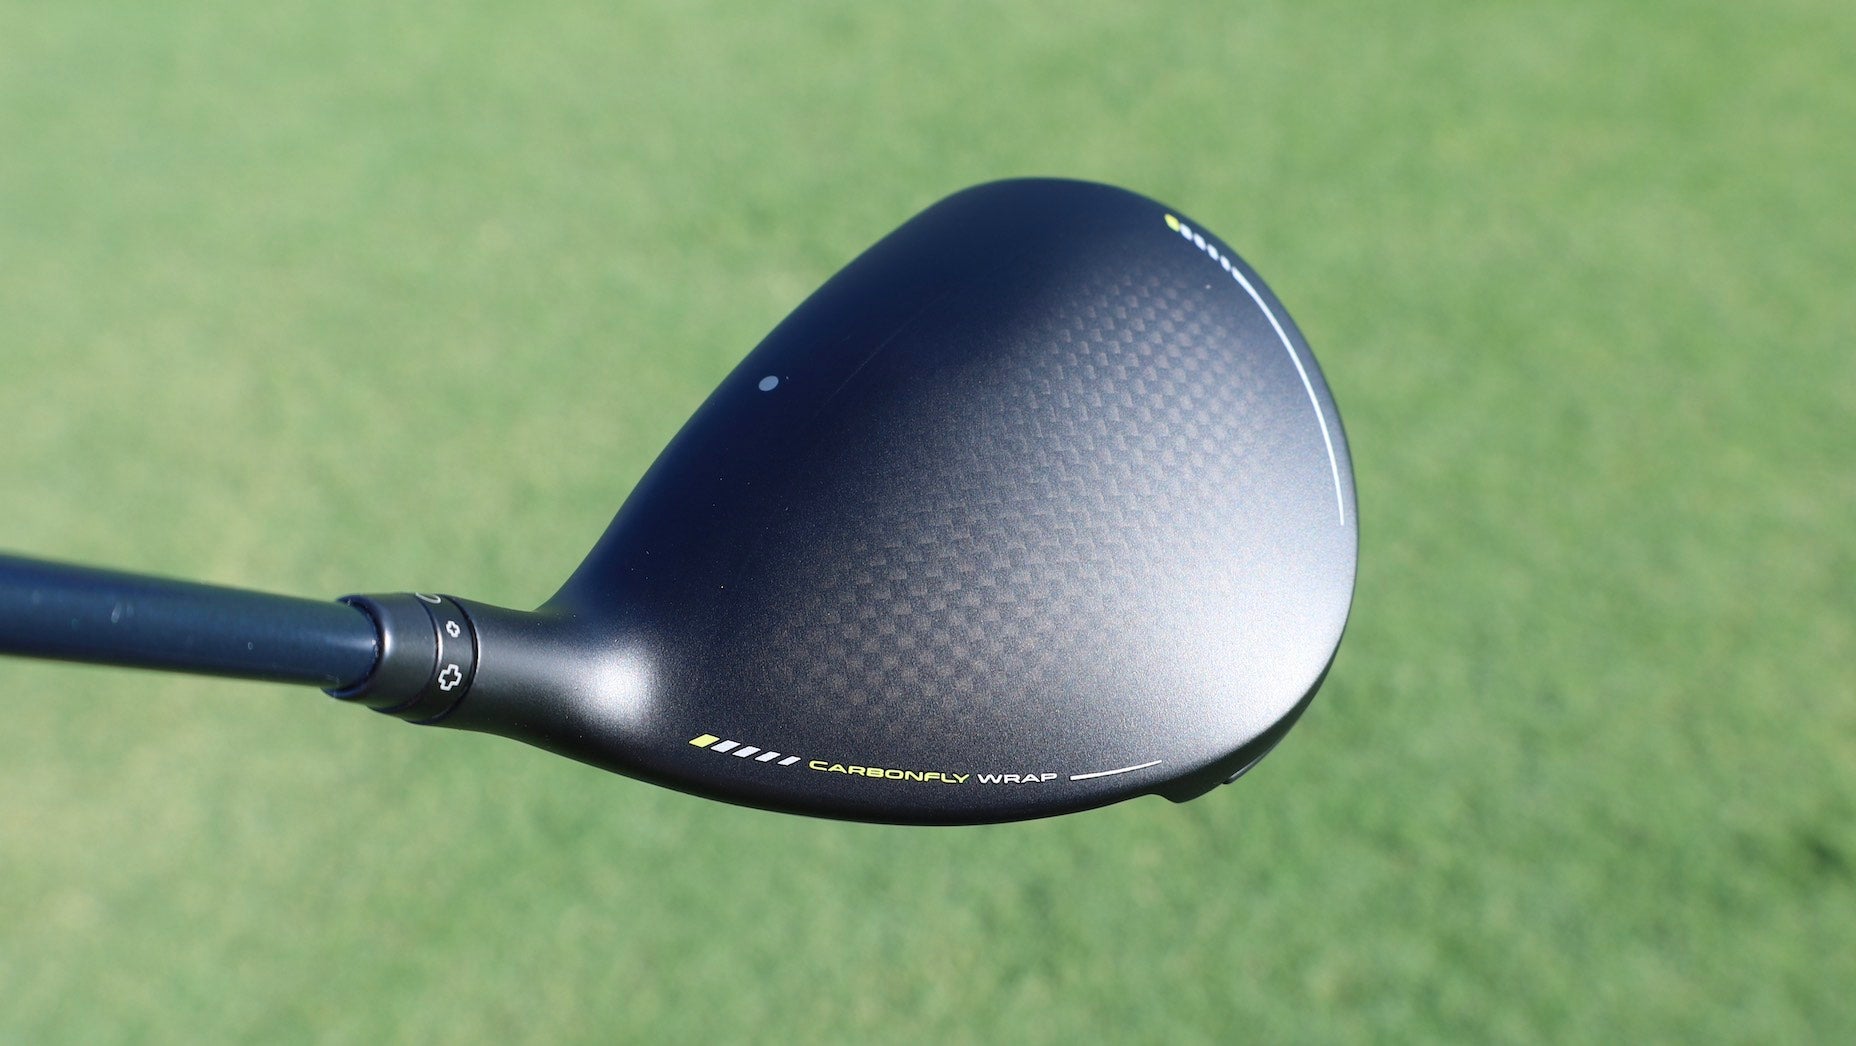 Ping G430 drivers, fairway woods, and hybrid | First Look